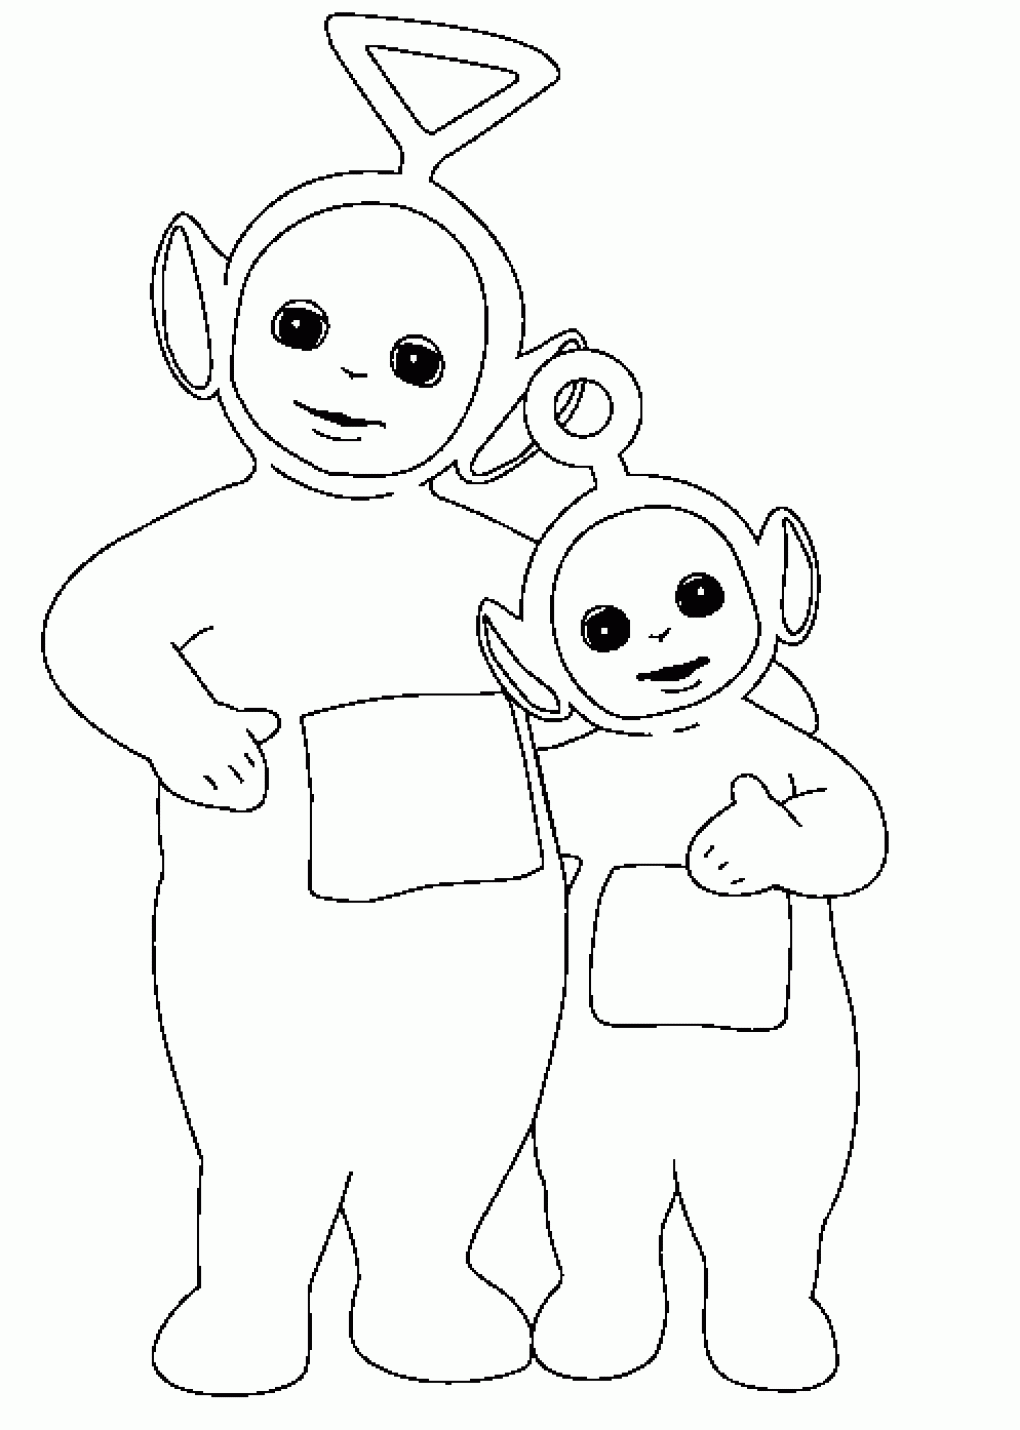 Teletubbies Coloring Page Cartoon